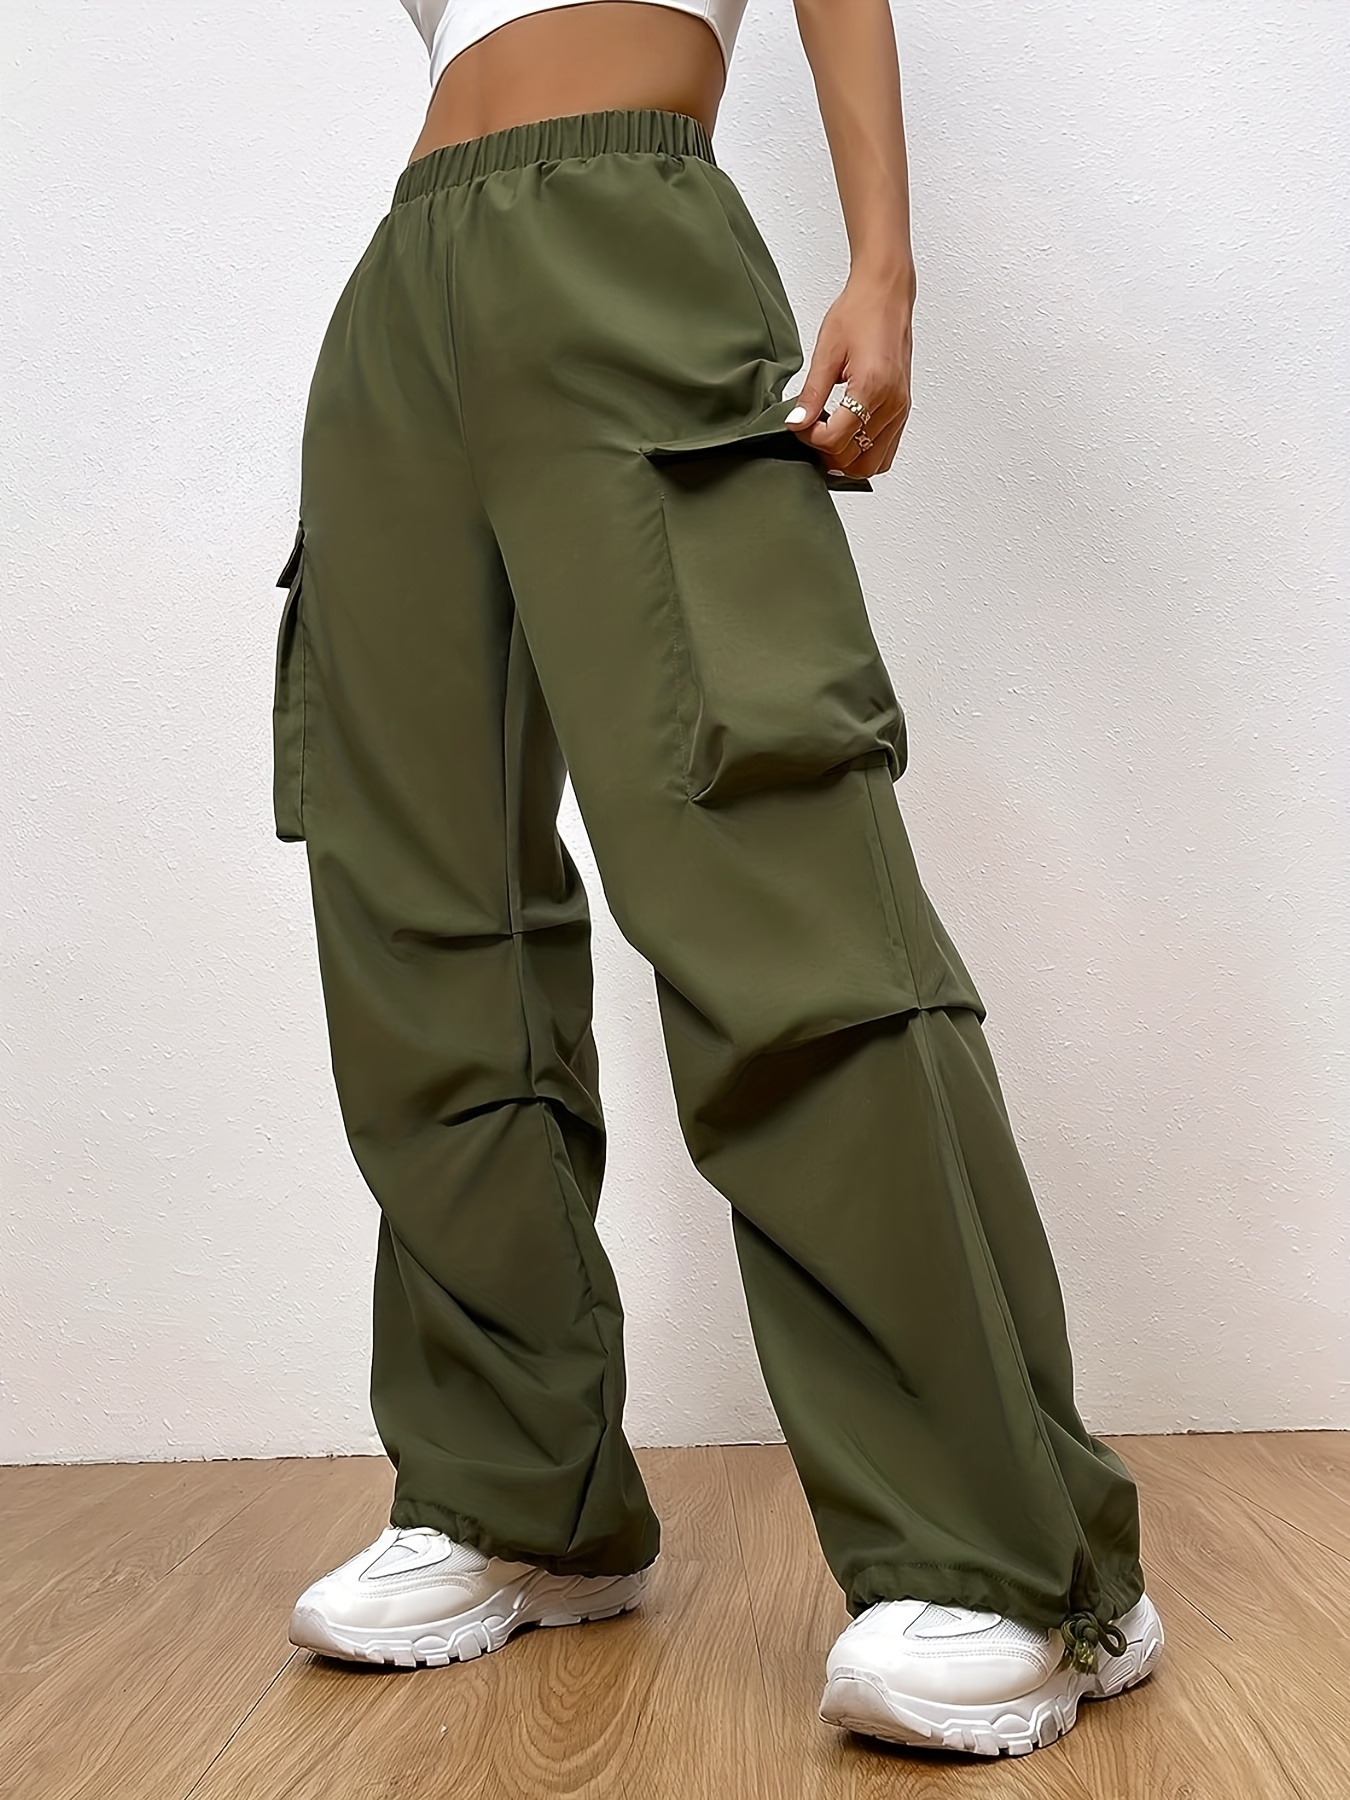 Women Casual Solid Color Skinny Cargo Pants Pockets Drawstring Joggers  Trouser